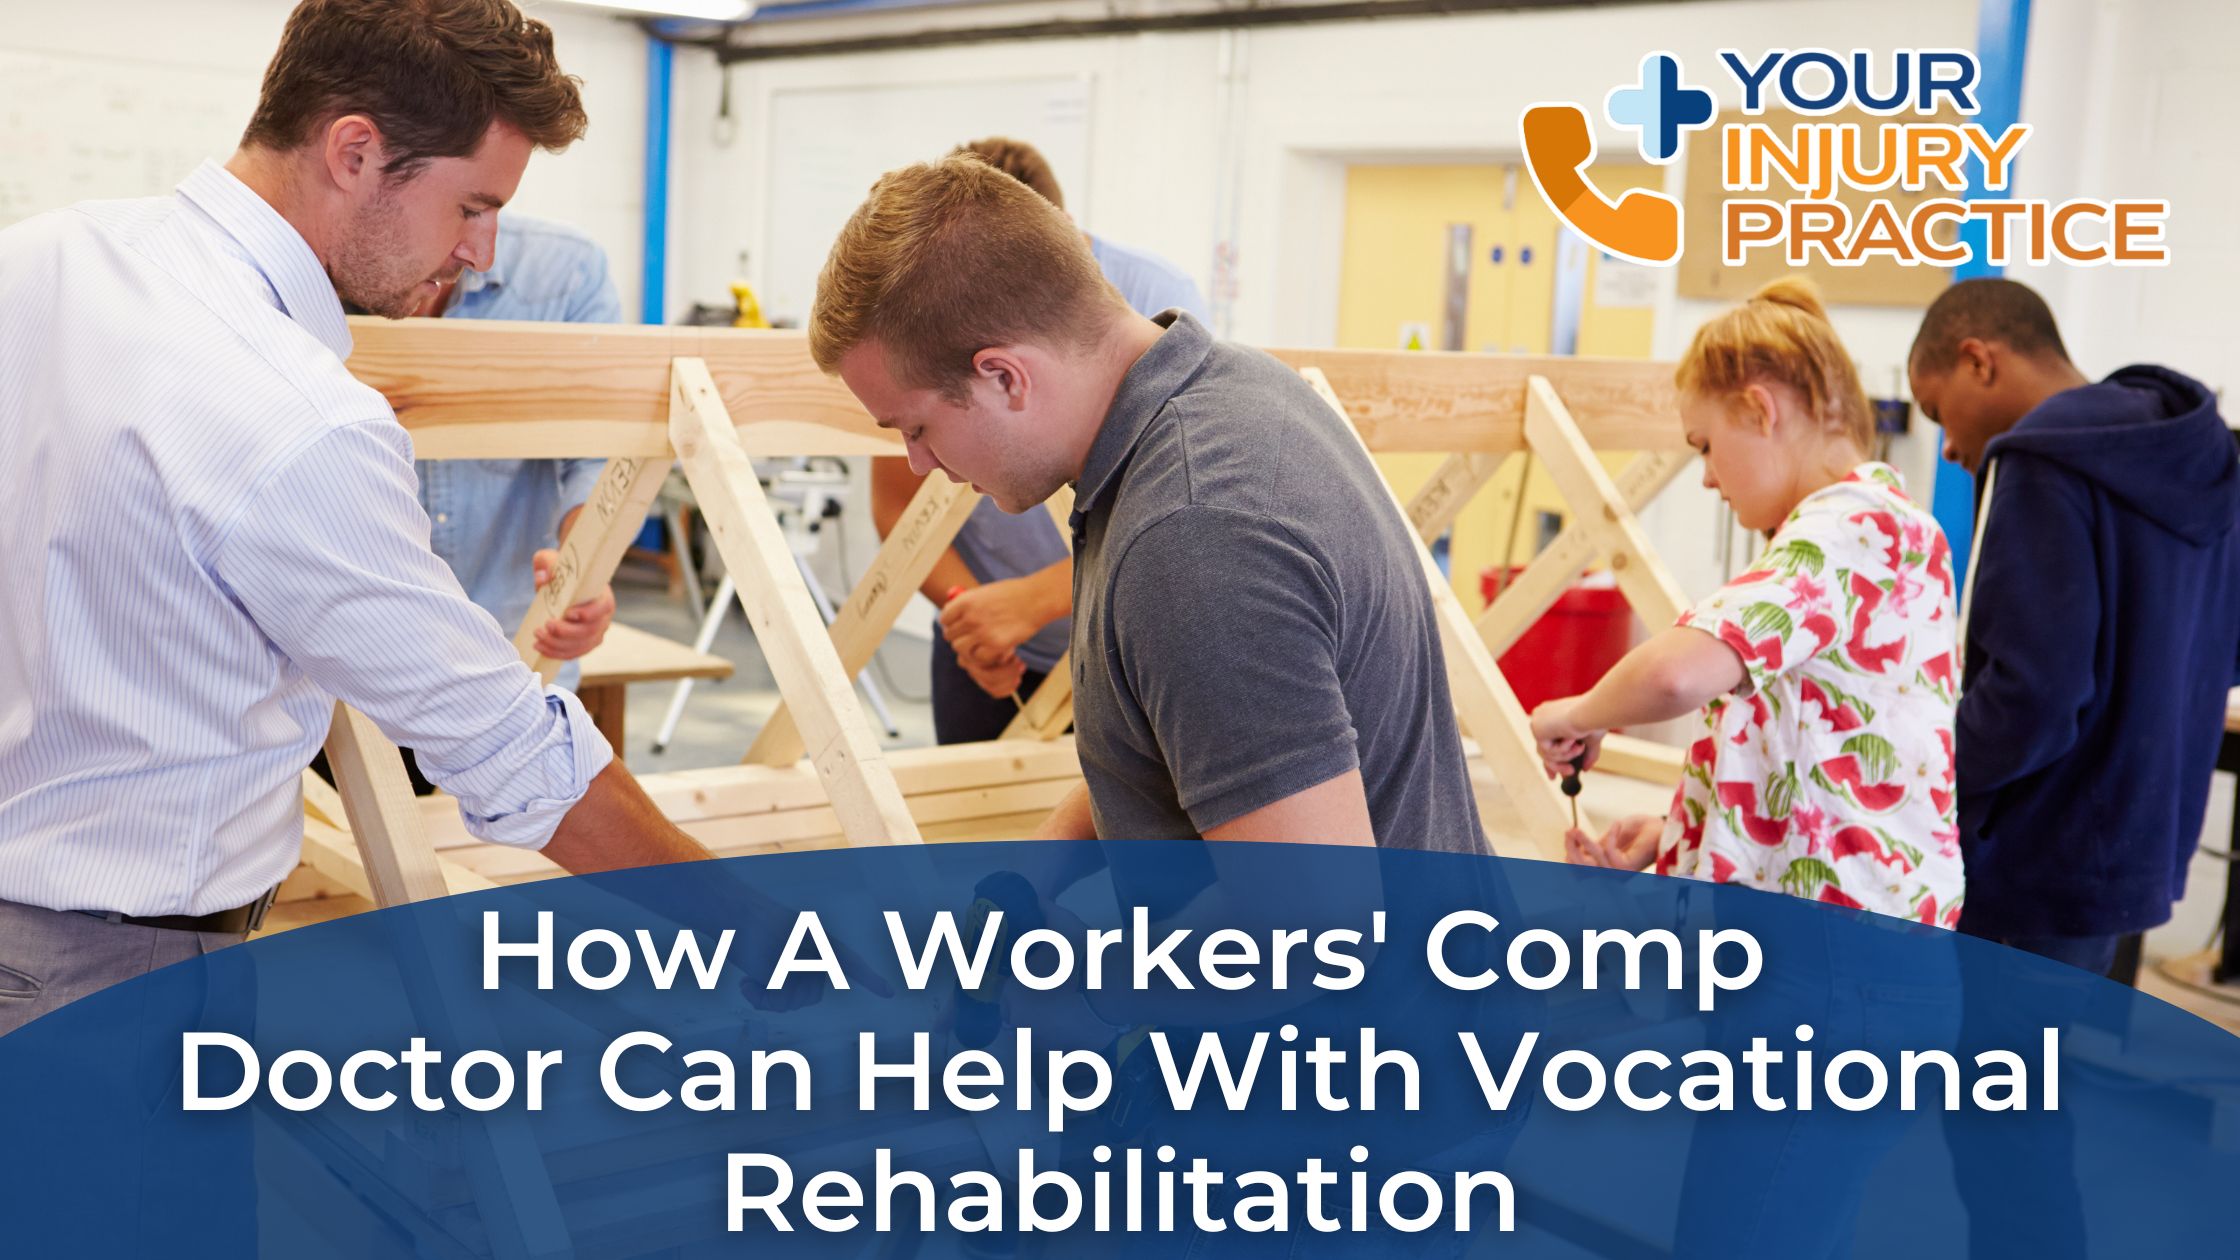 Getting Back to Work with Vocational Rehab and a Workers' Comp Doctor